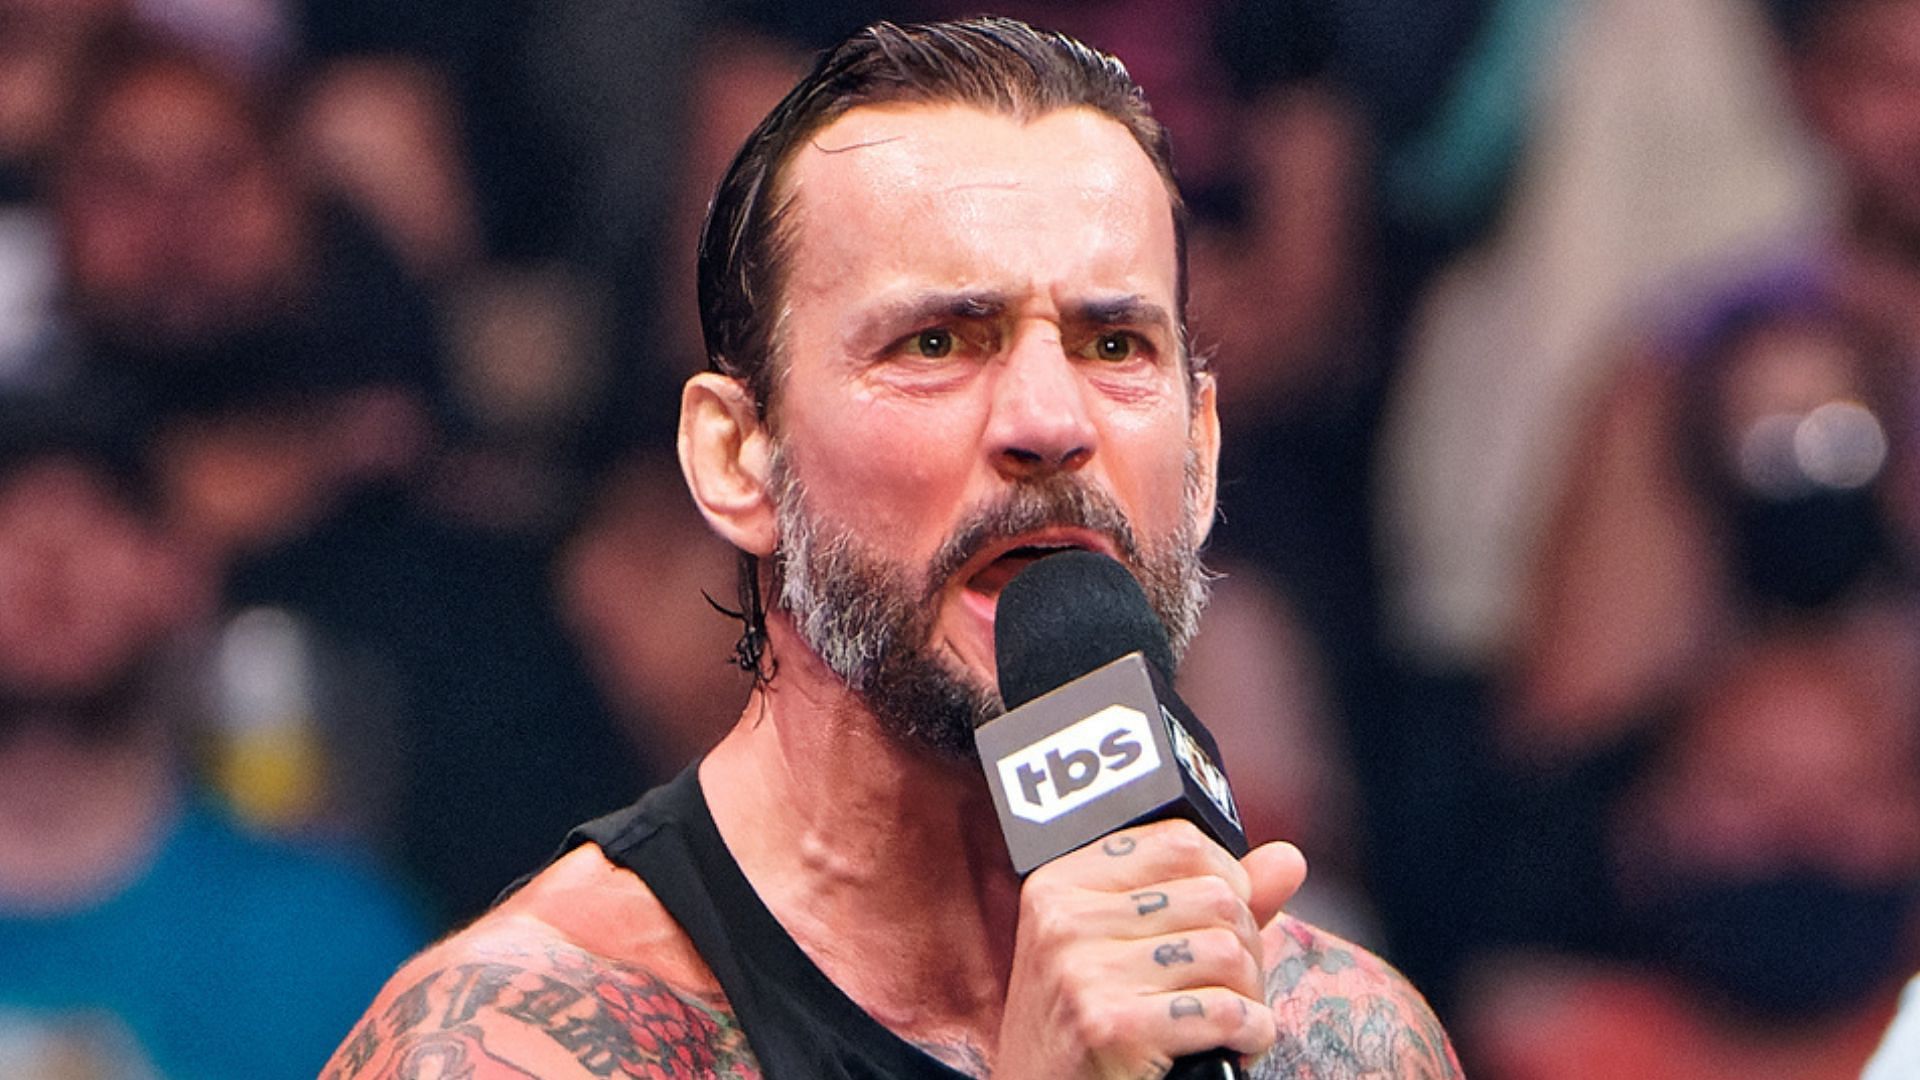 Will young AEW stars listen to a Hall of Famer more than CM Punk?